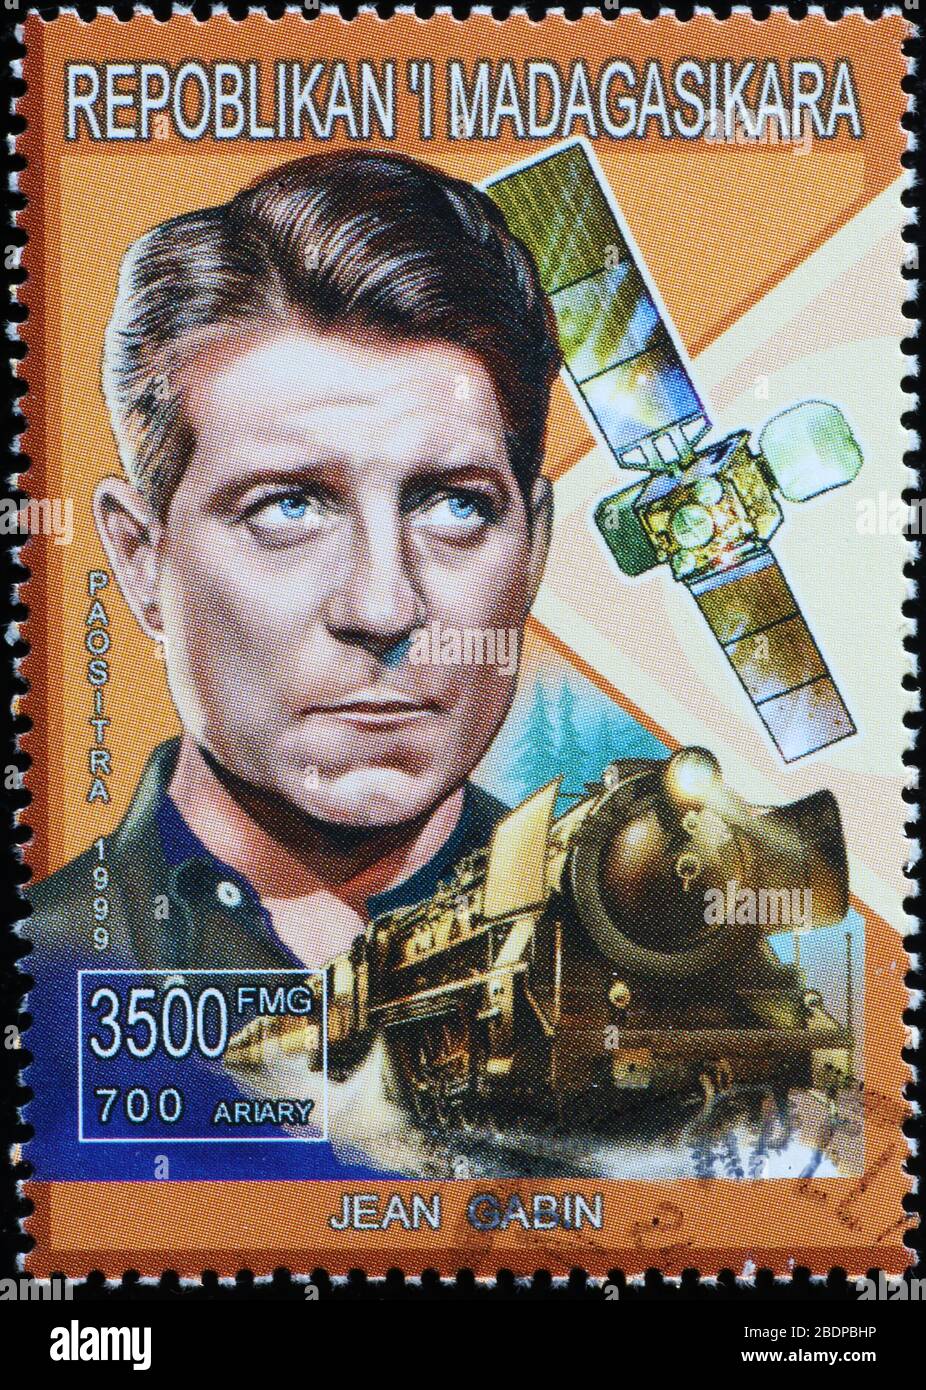 French actor Jean Gabin on postage stamp Stock Photo